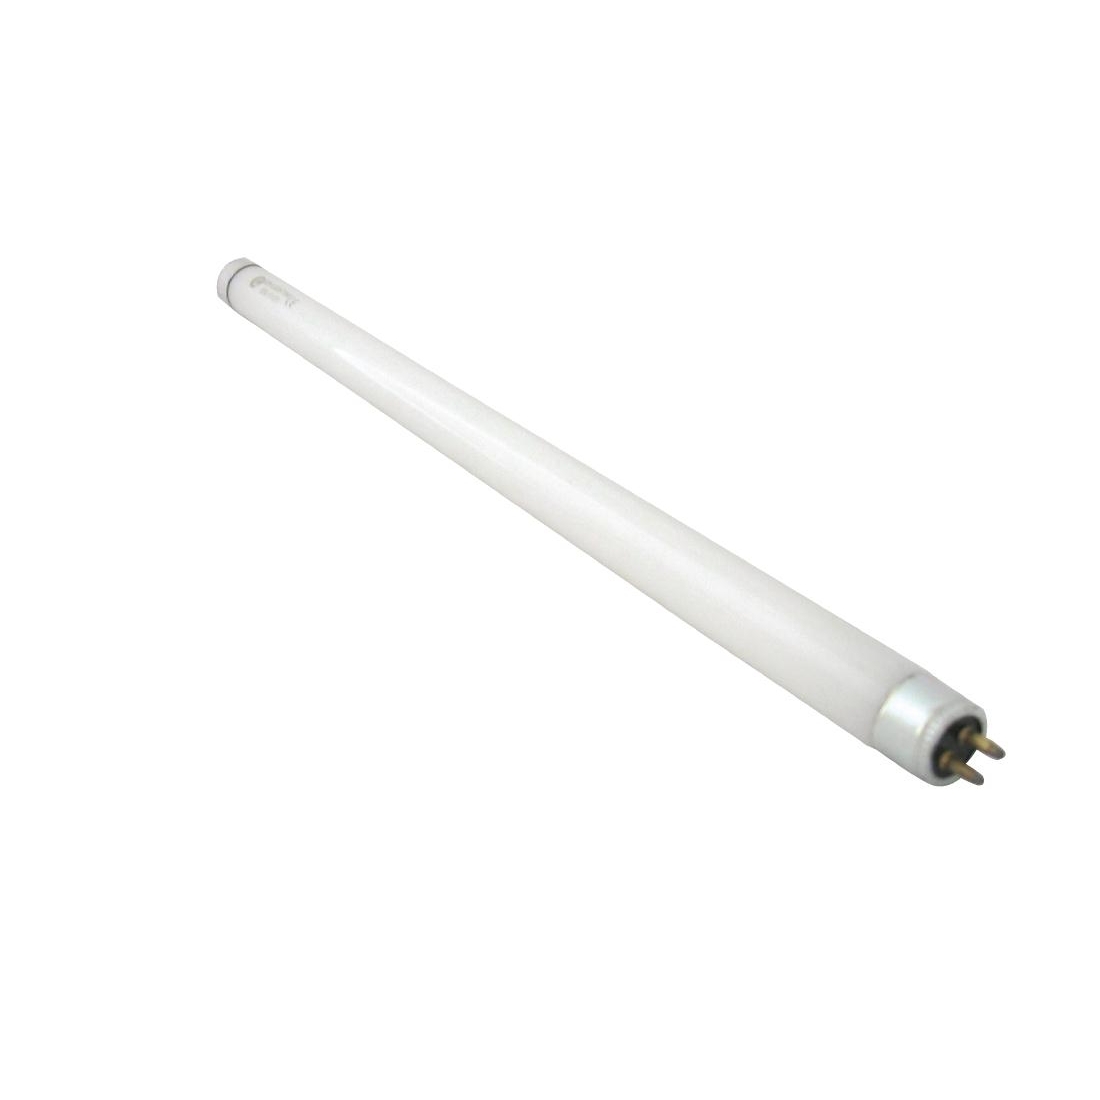 Replacement 15W Fluorescent Tube for Eazyzap Fly Killers